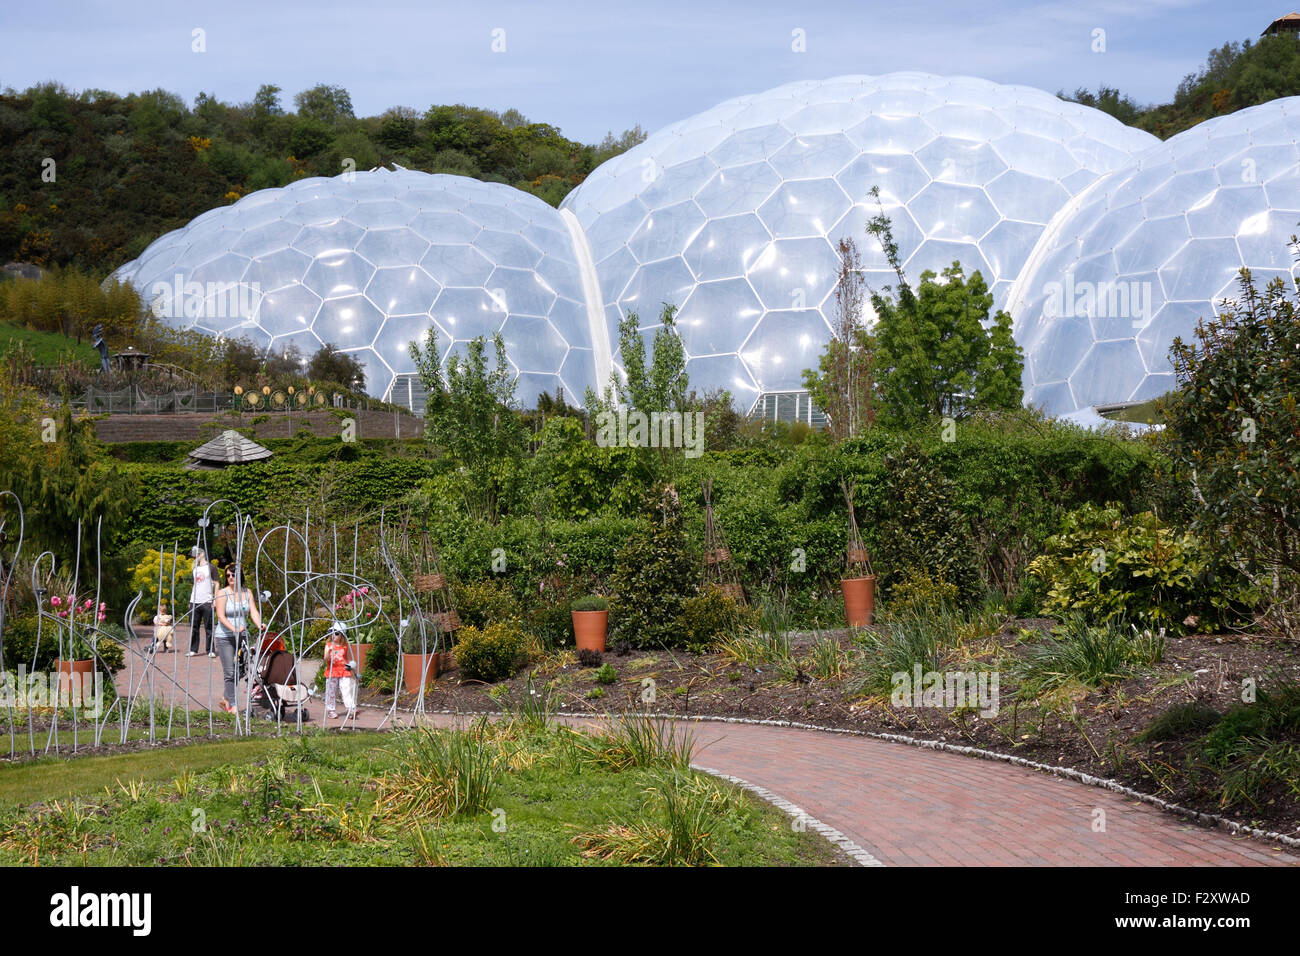 THE BIOMES WITHIN THE EDEN PROJECT BODELVA CORNWALL UK. Stock Photo